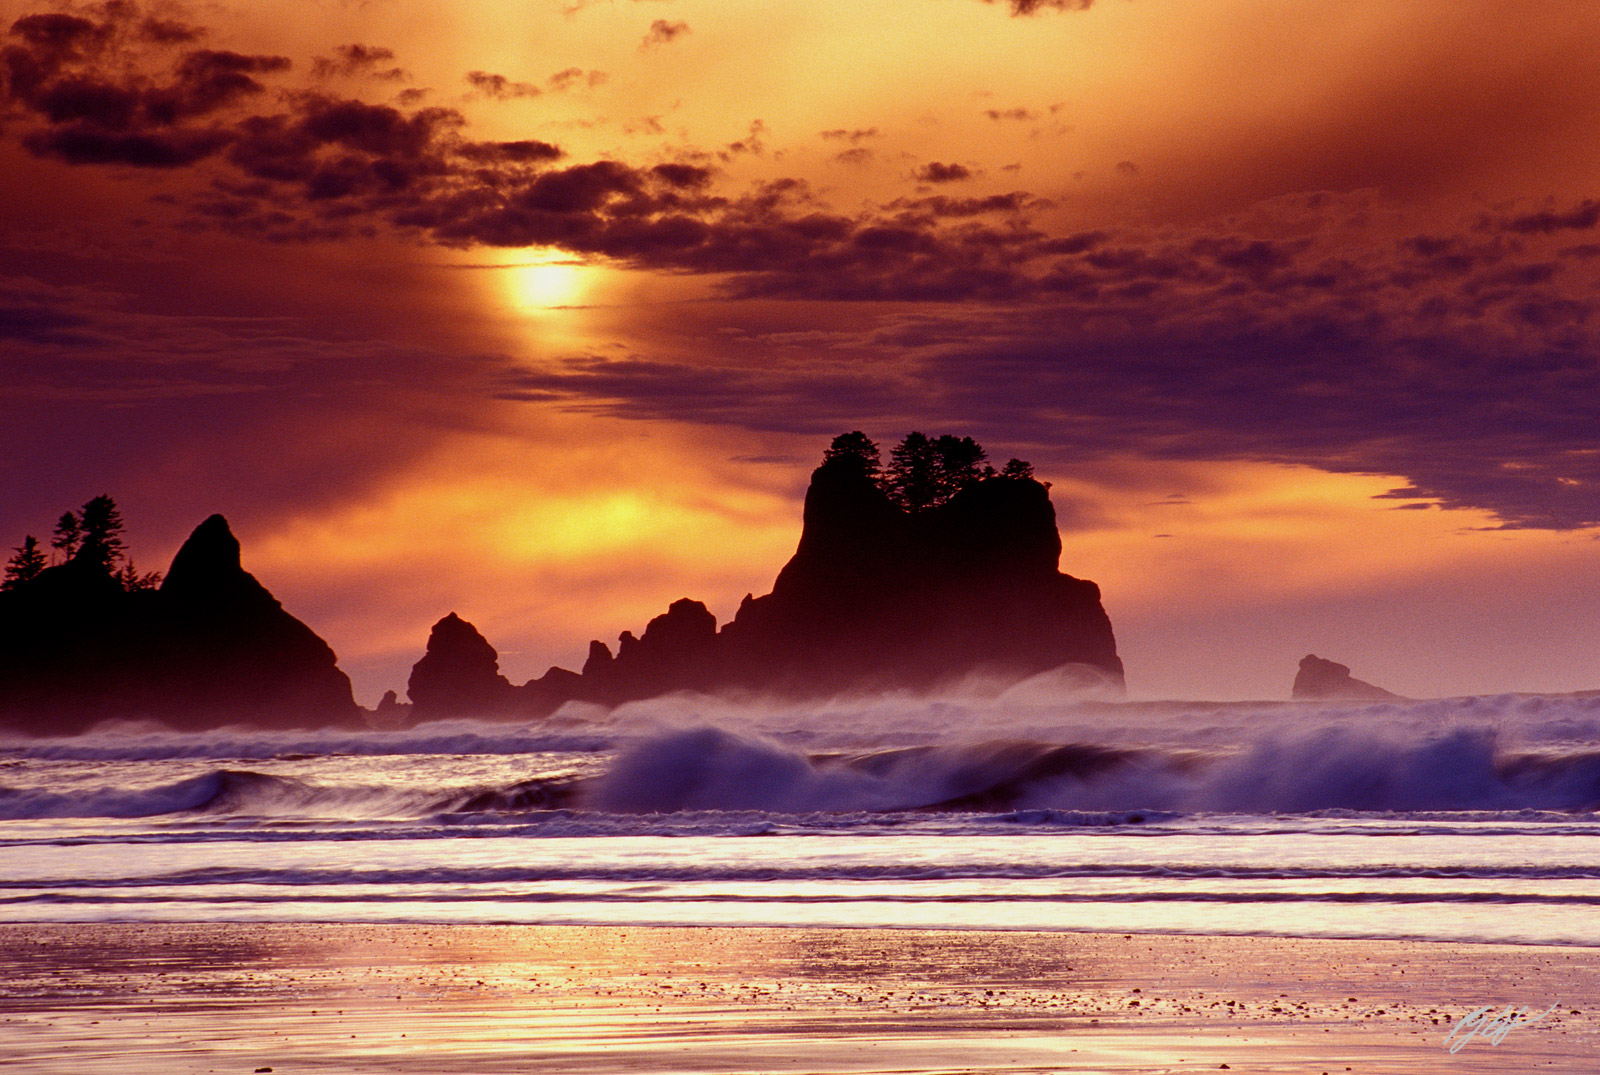 Sunset and Surf with the Point of the Arches from Shi Shi Beach in Olympic National Park in Washington